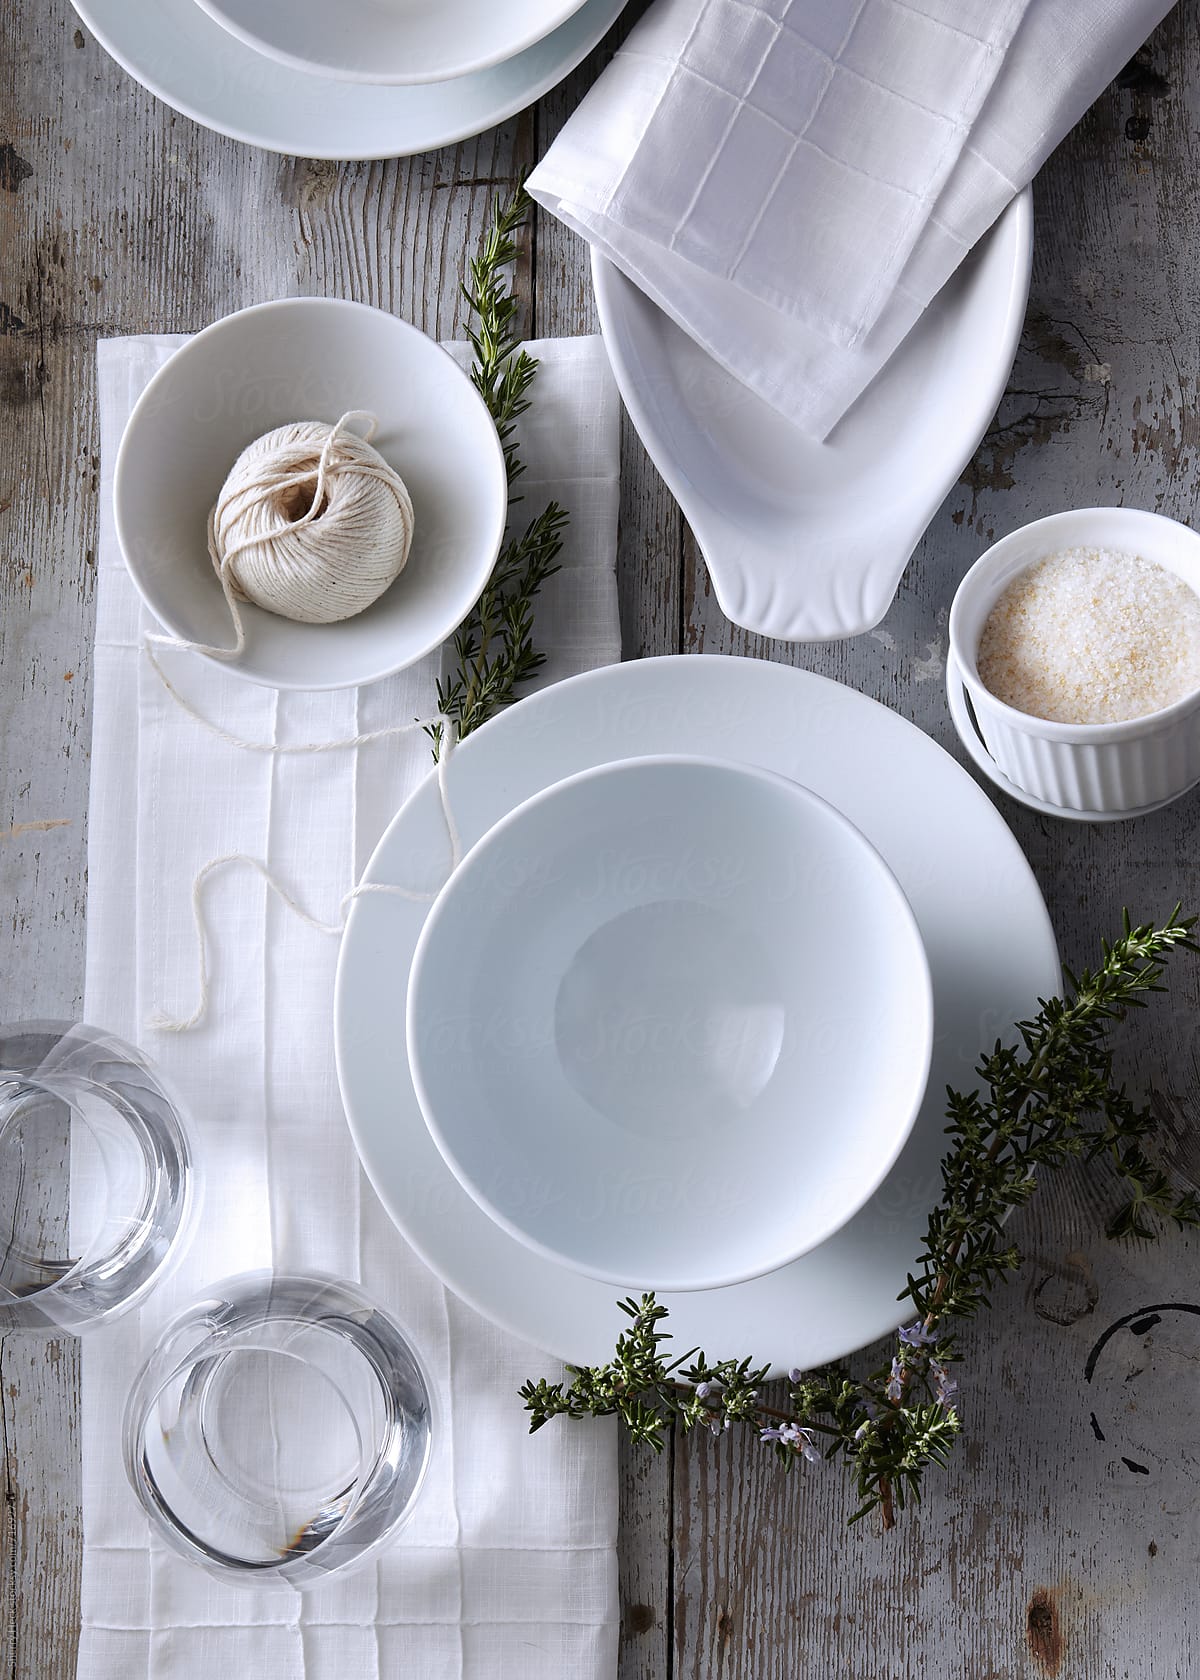 White plates and bowls with rosemary spring on white wood surface